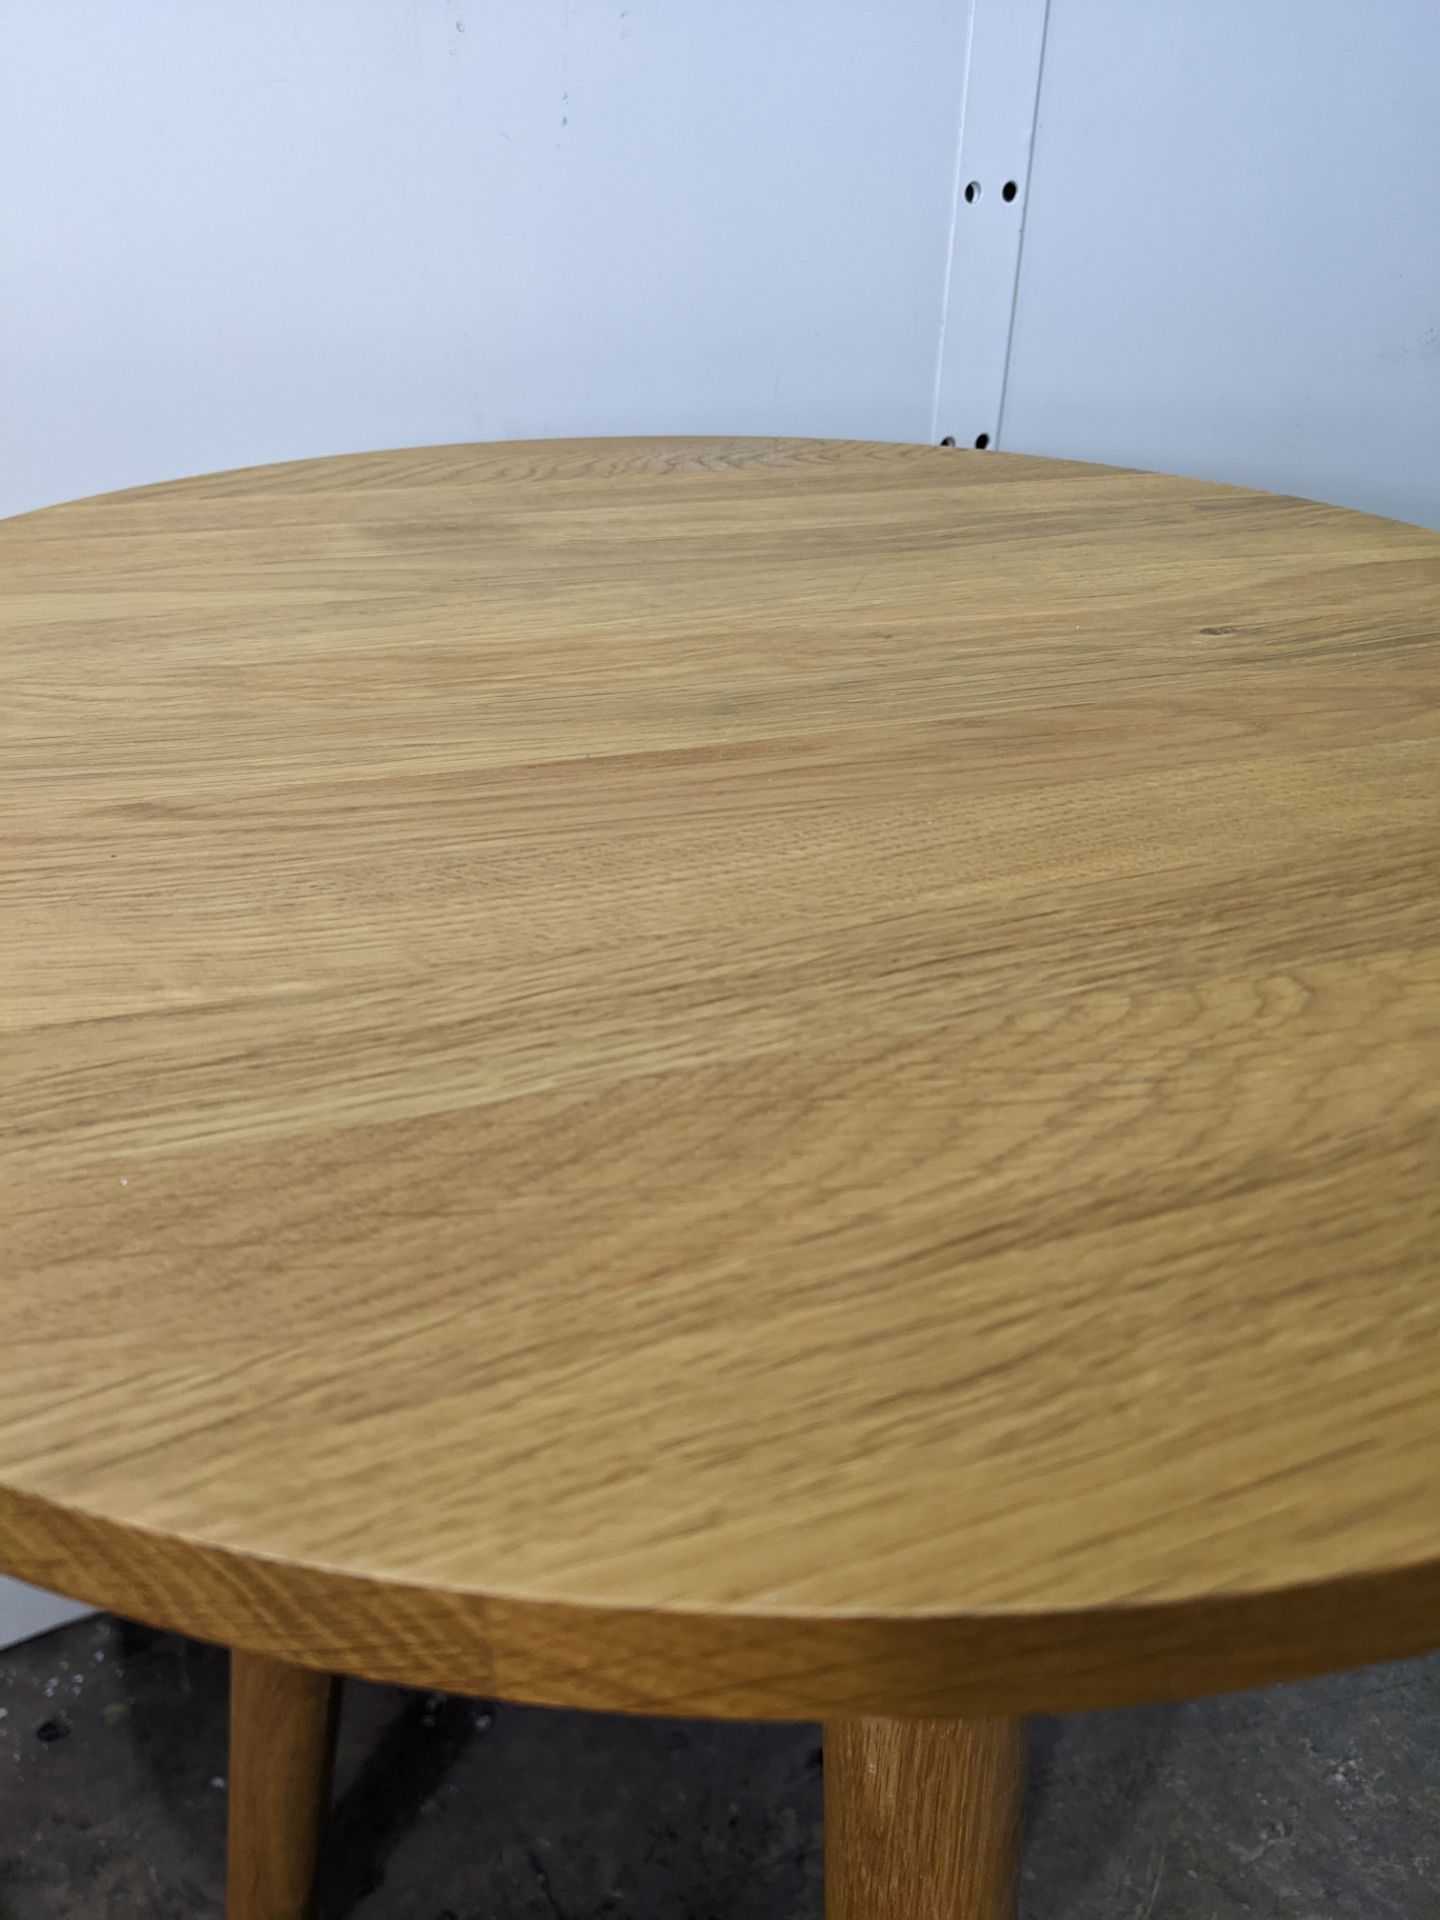 2 x Round Wooden 3 Legged Side Tables - Image 3 of 4